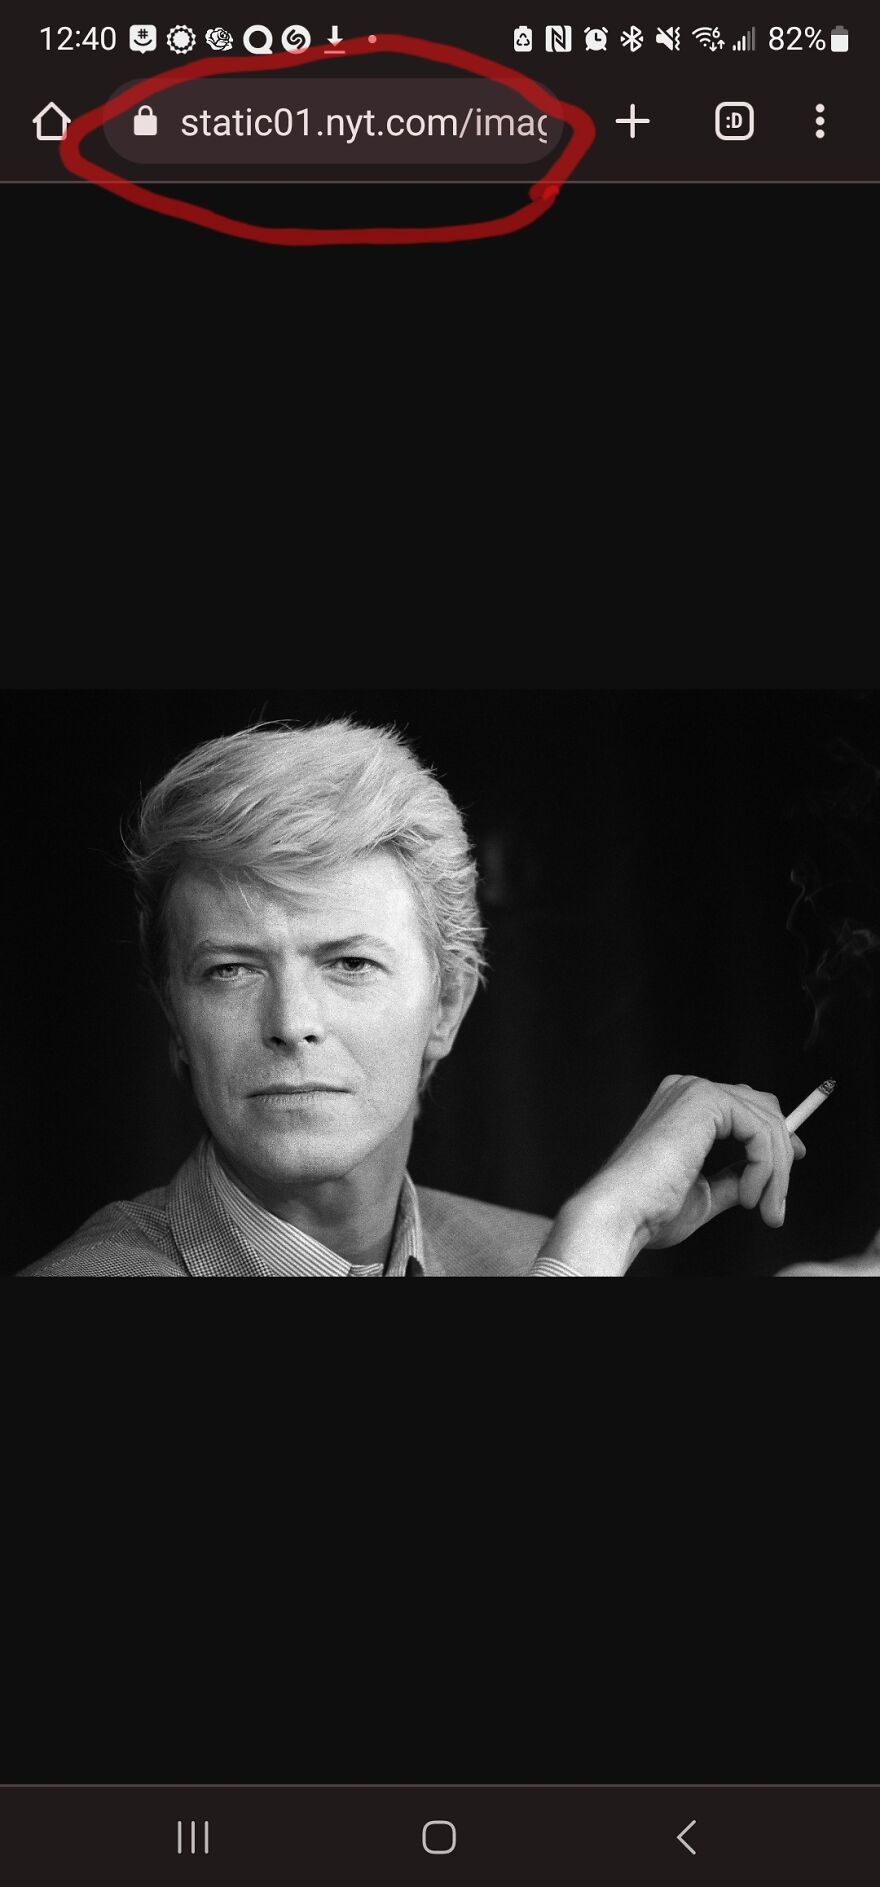 How To Comment With An Image Using Your Phone (Featuring David Bowie!)